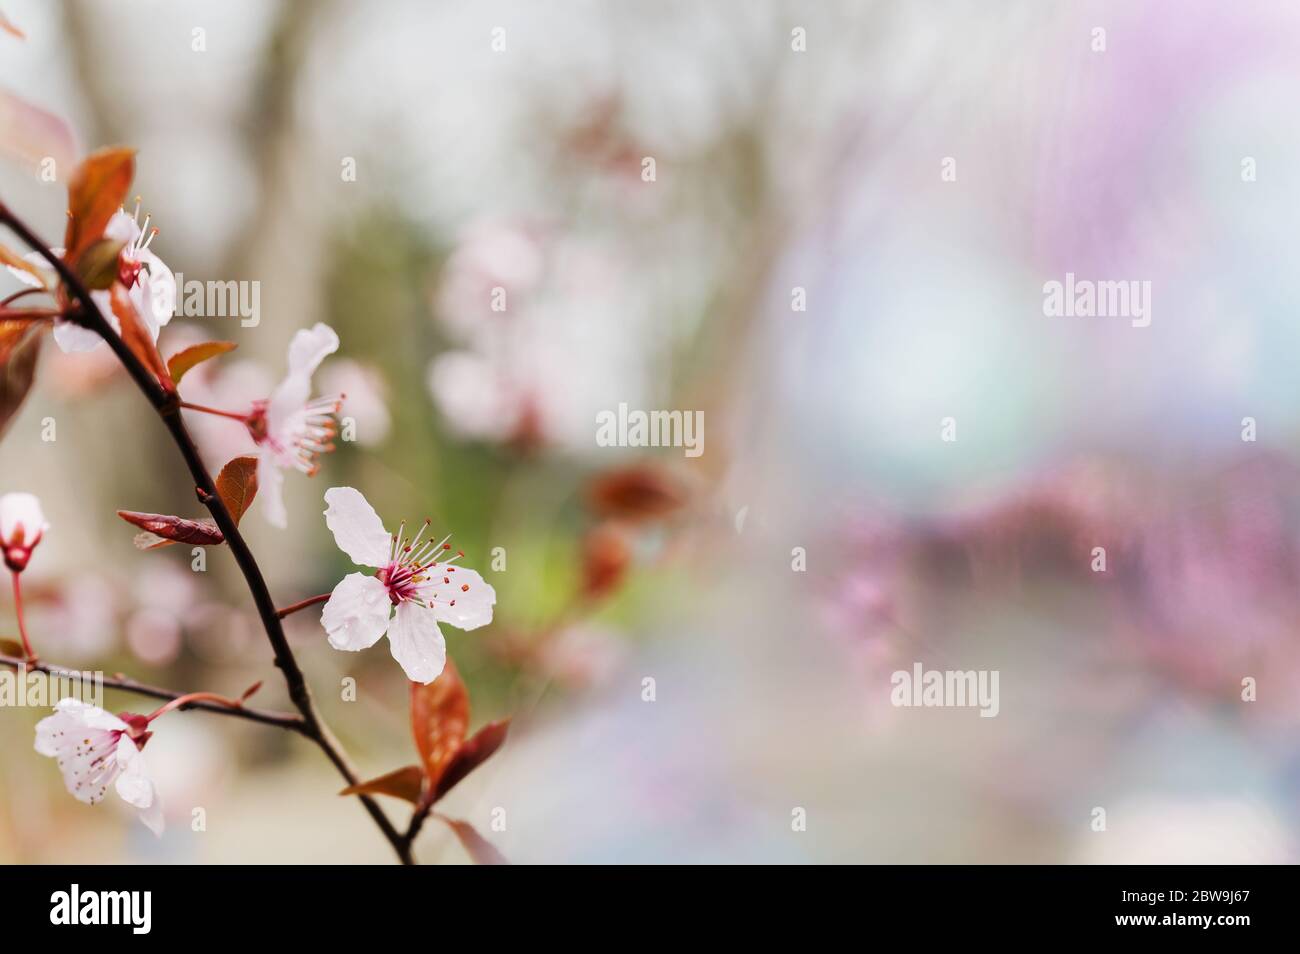 Spring blossoms on tree branch Stock Photo